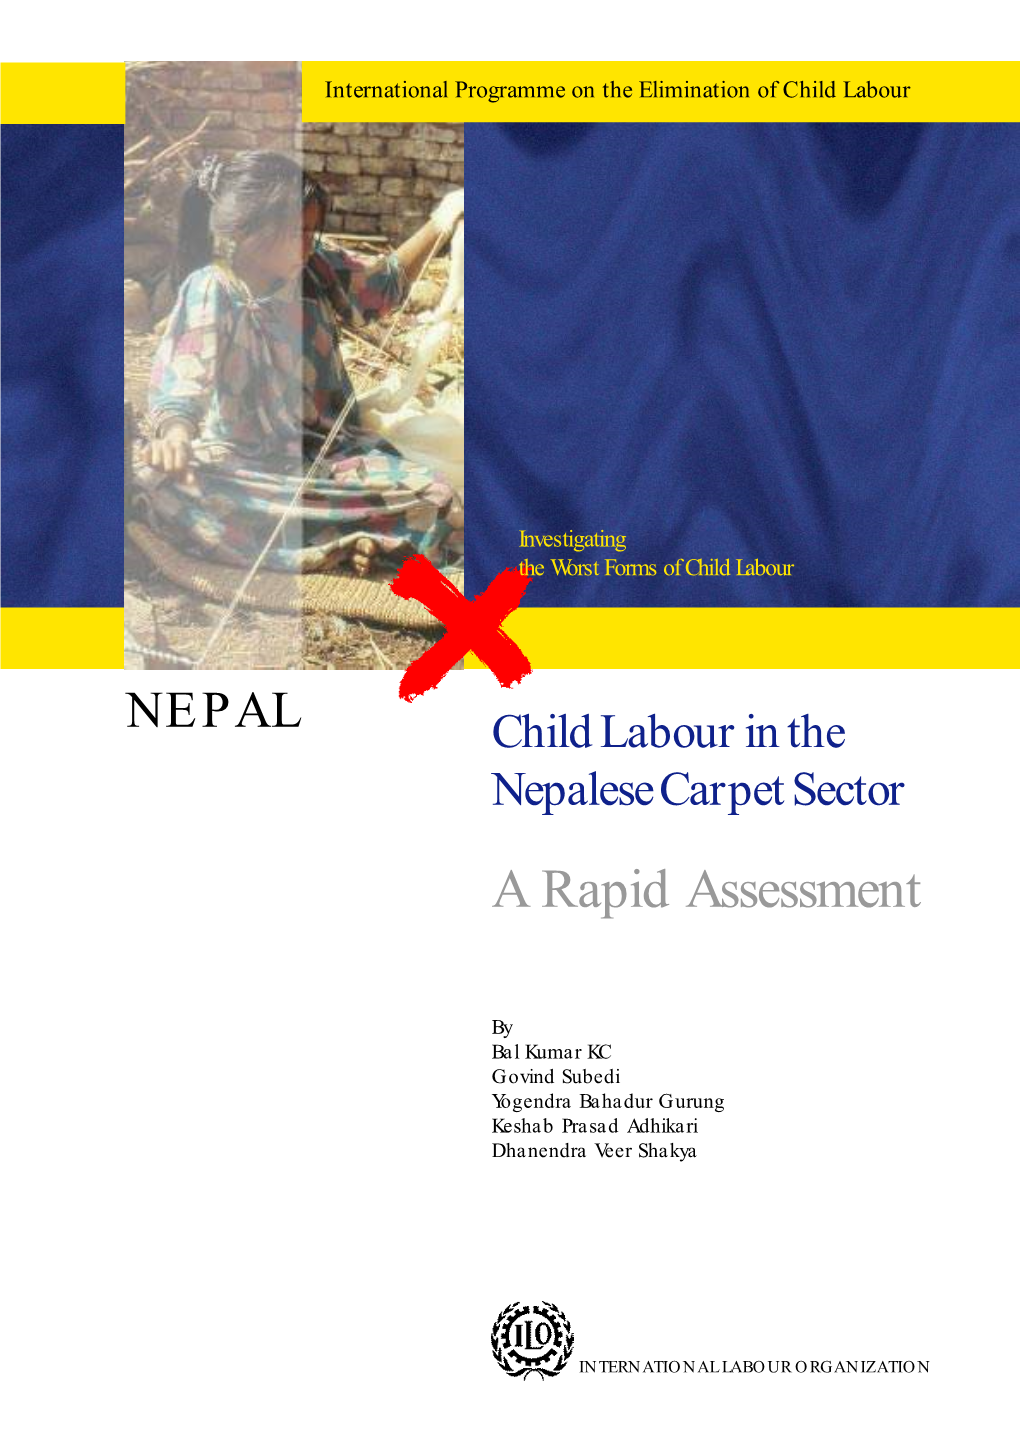 Child Labour in the Nepalese Carpet Sector: a Rapid Assessment